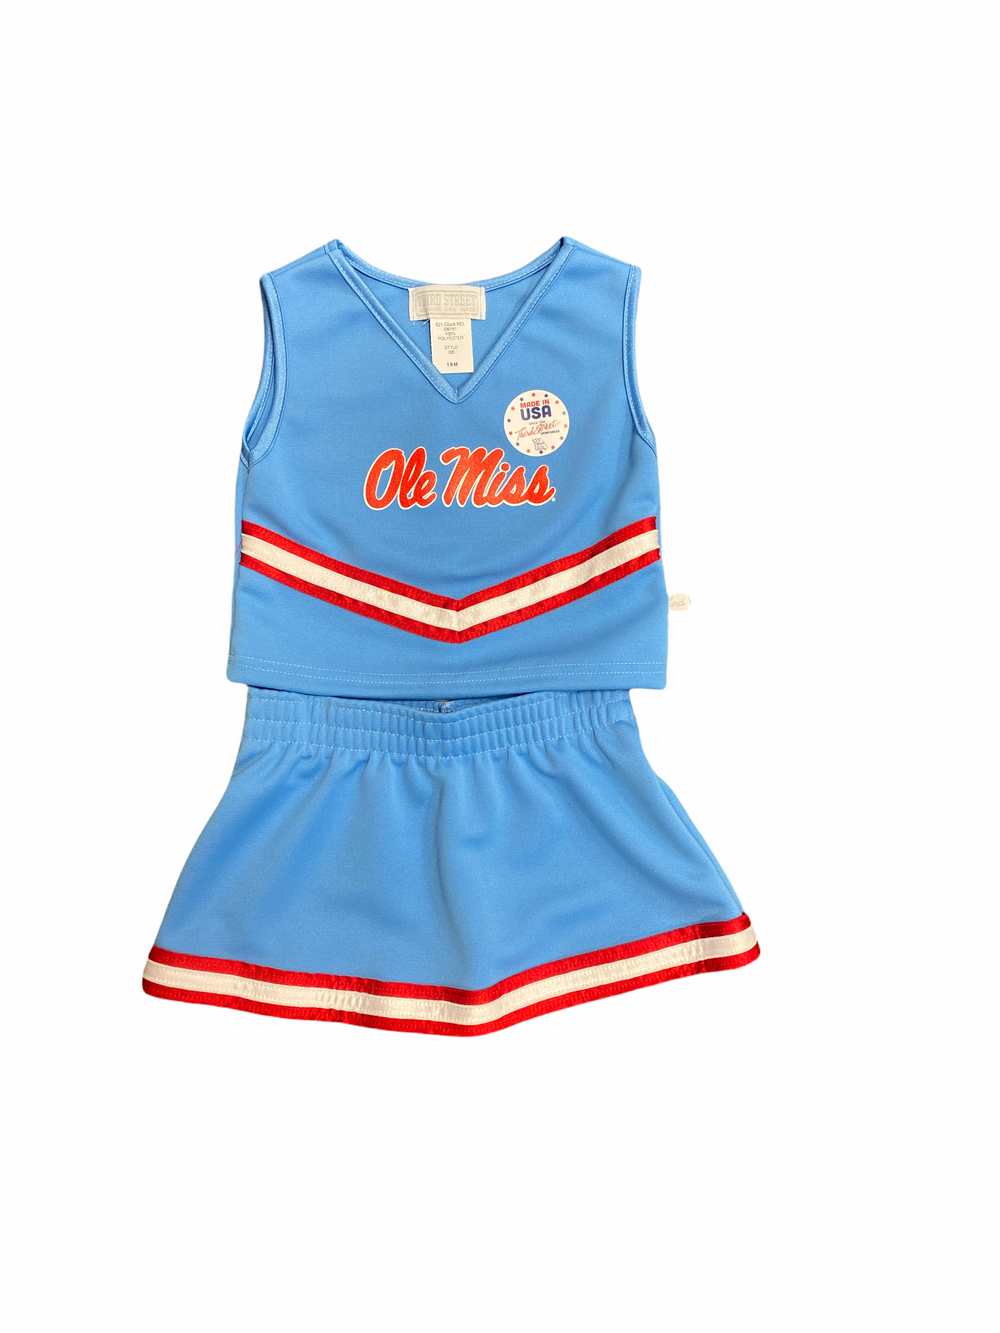 Third Street Ole Miss Powder Blue Cheer Outfit for Kids – The